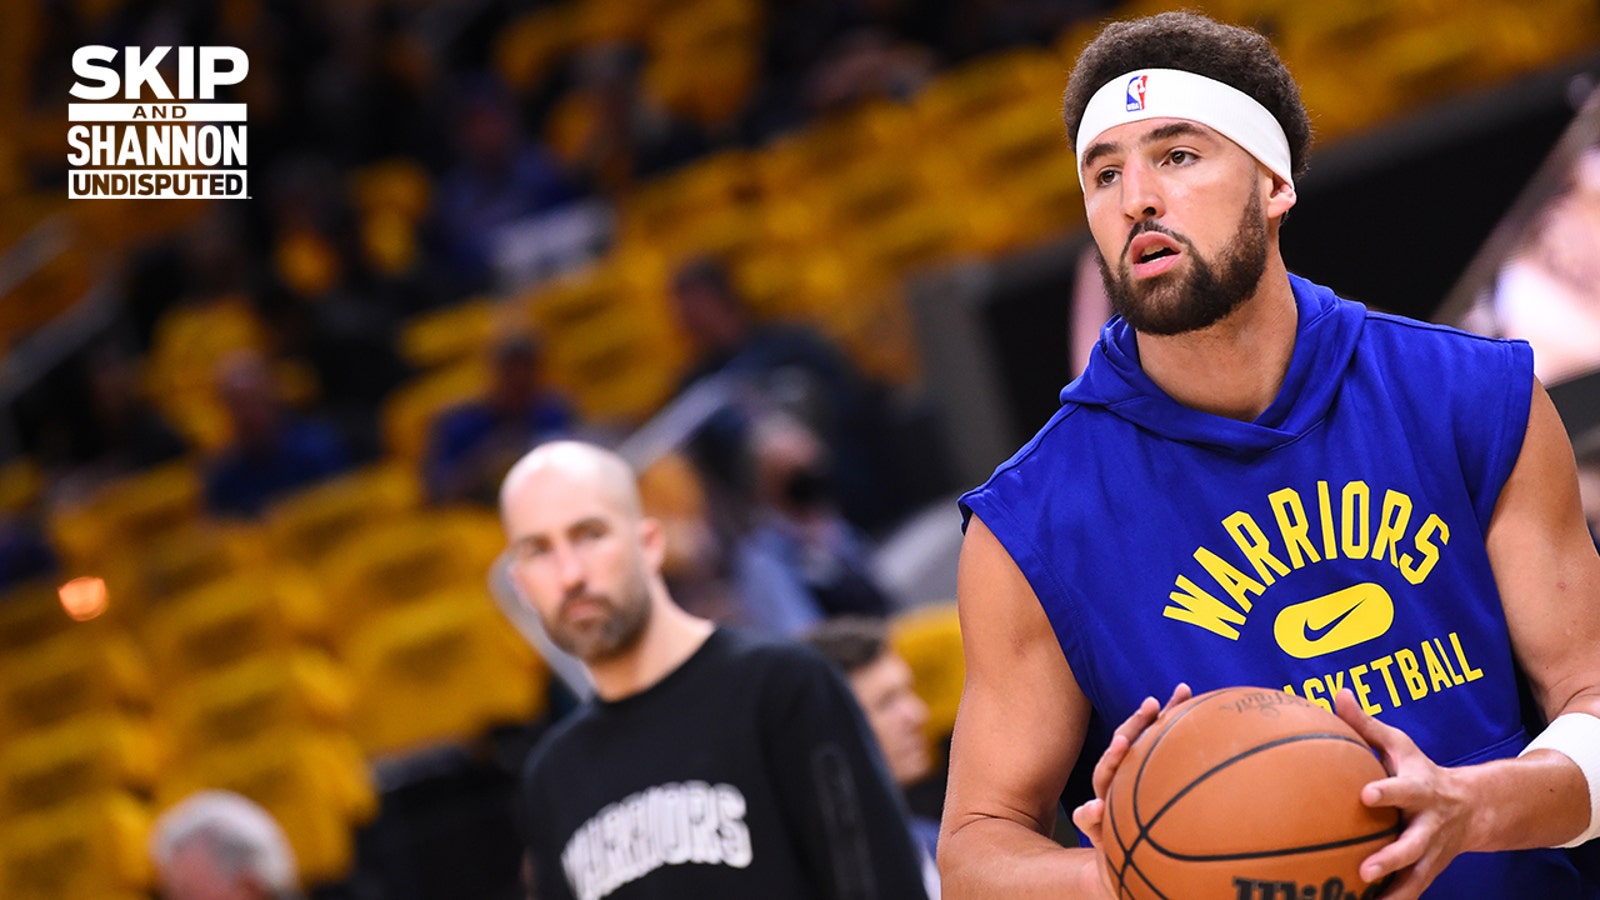 Klay Thompson "getting big 2015 vibes" ahead of Game 4